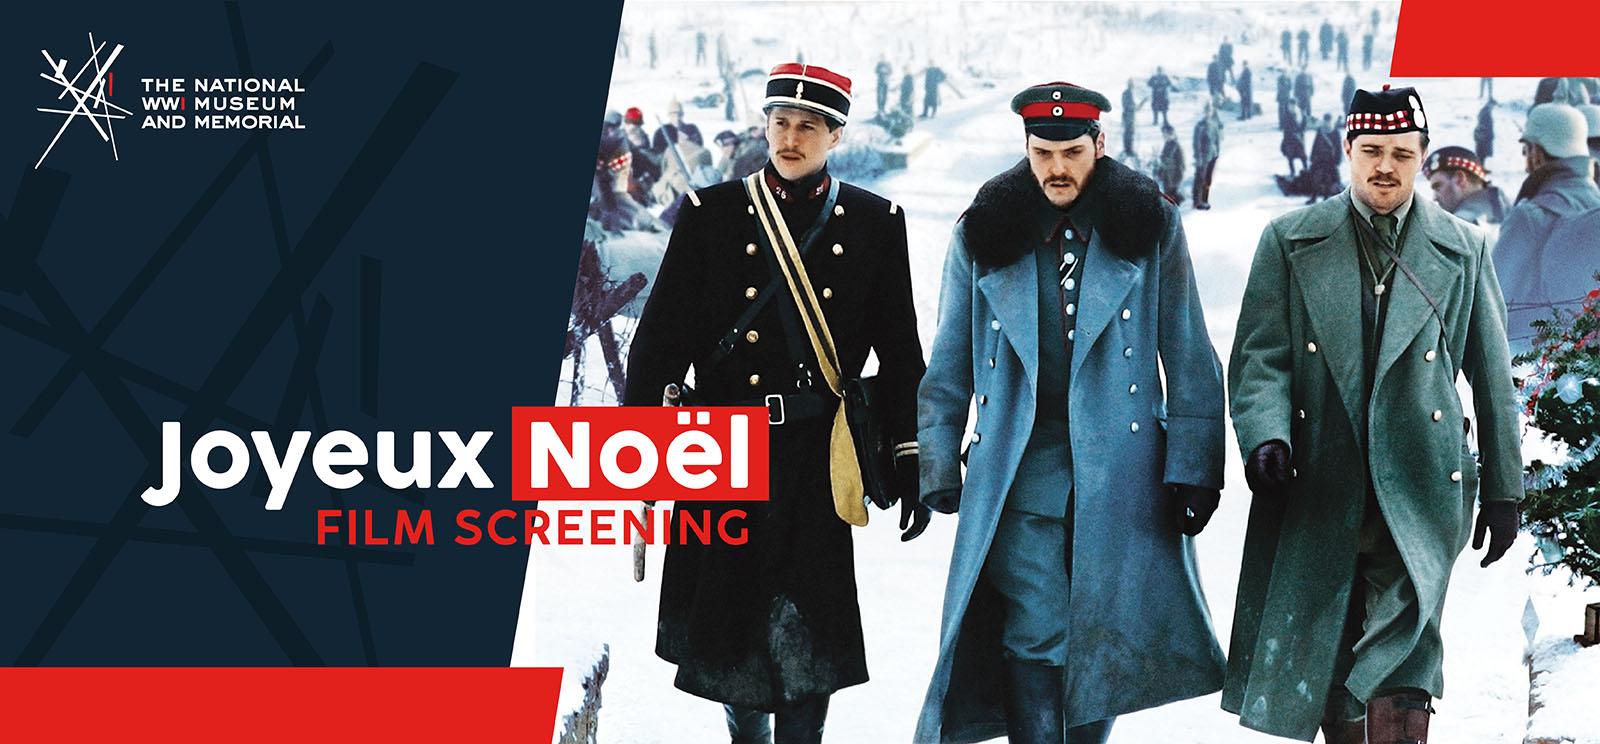 Background: Joyeux Noël movie poster showing three white men wearing winter military uniforms of different nationalities walking through the snow together. Text: Joyeux Noël / Film Screening